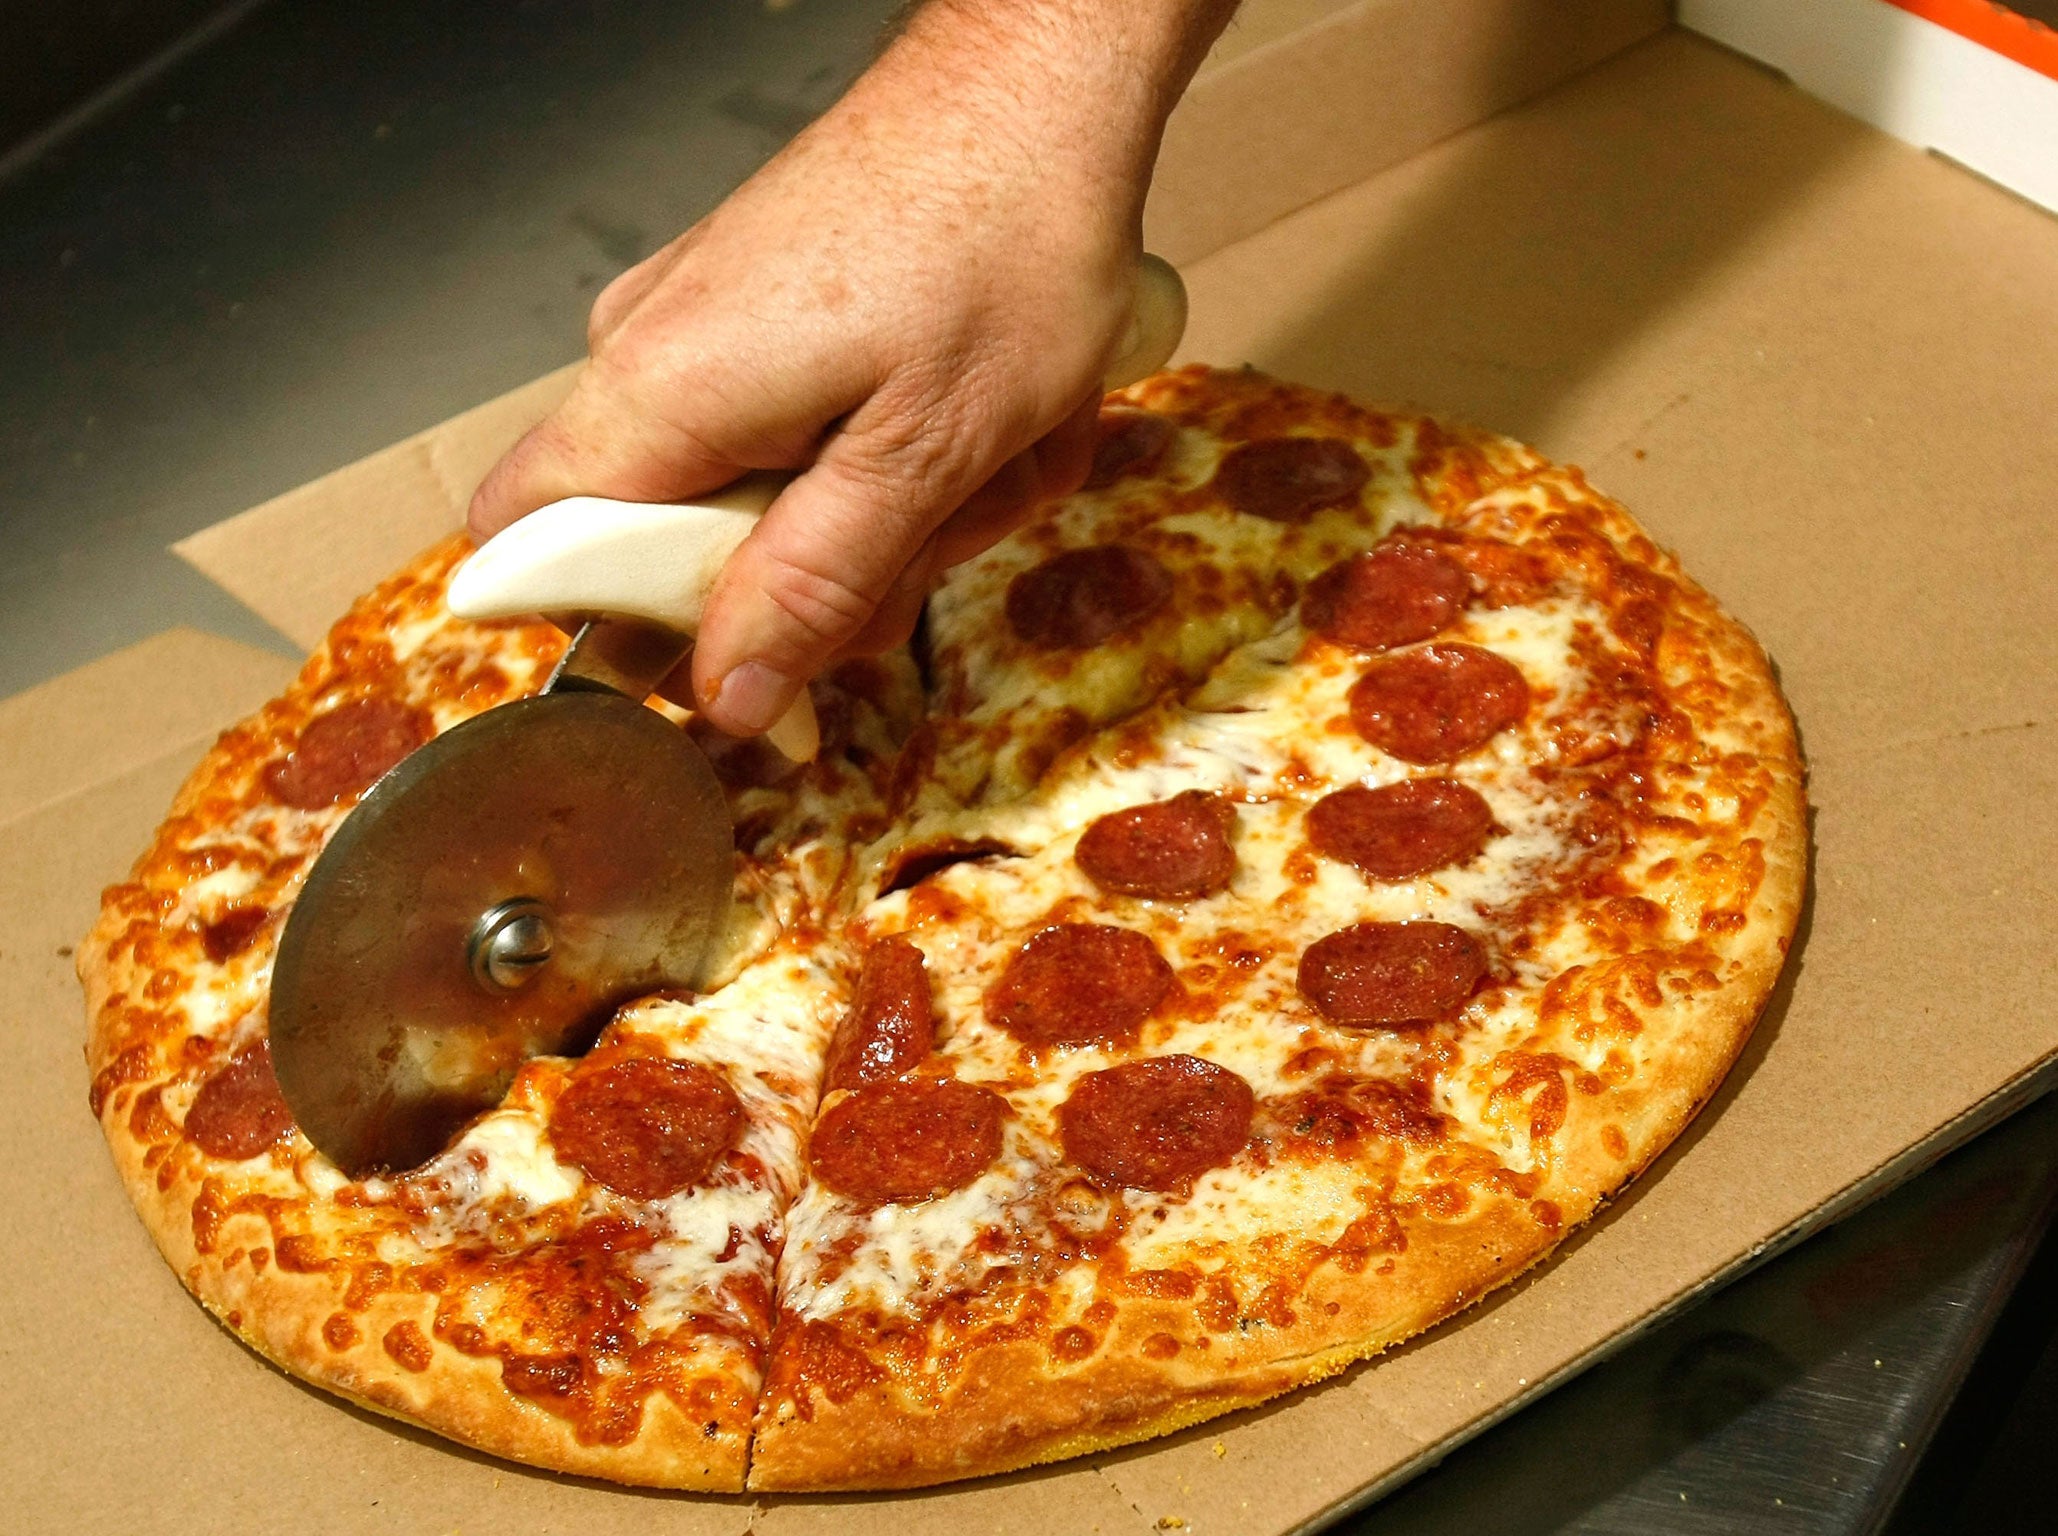 Scientists are creating pizza that could last as long as fresh pizza, such as the deep pan in this picture